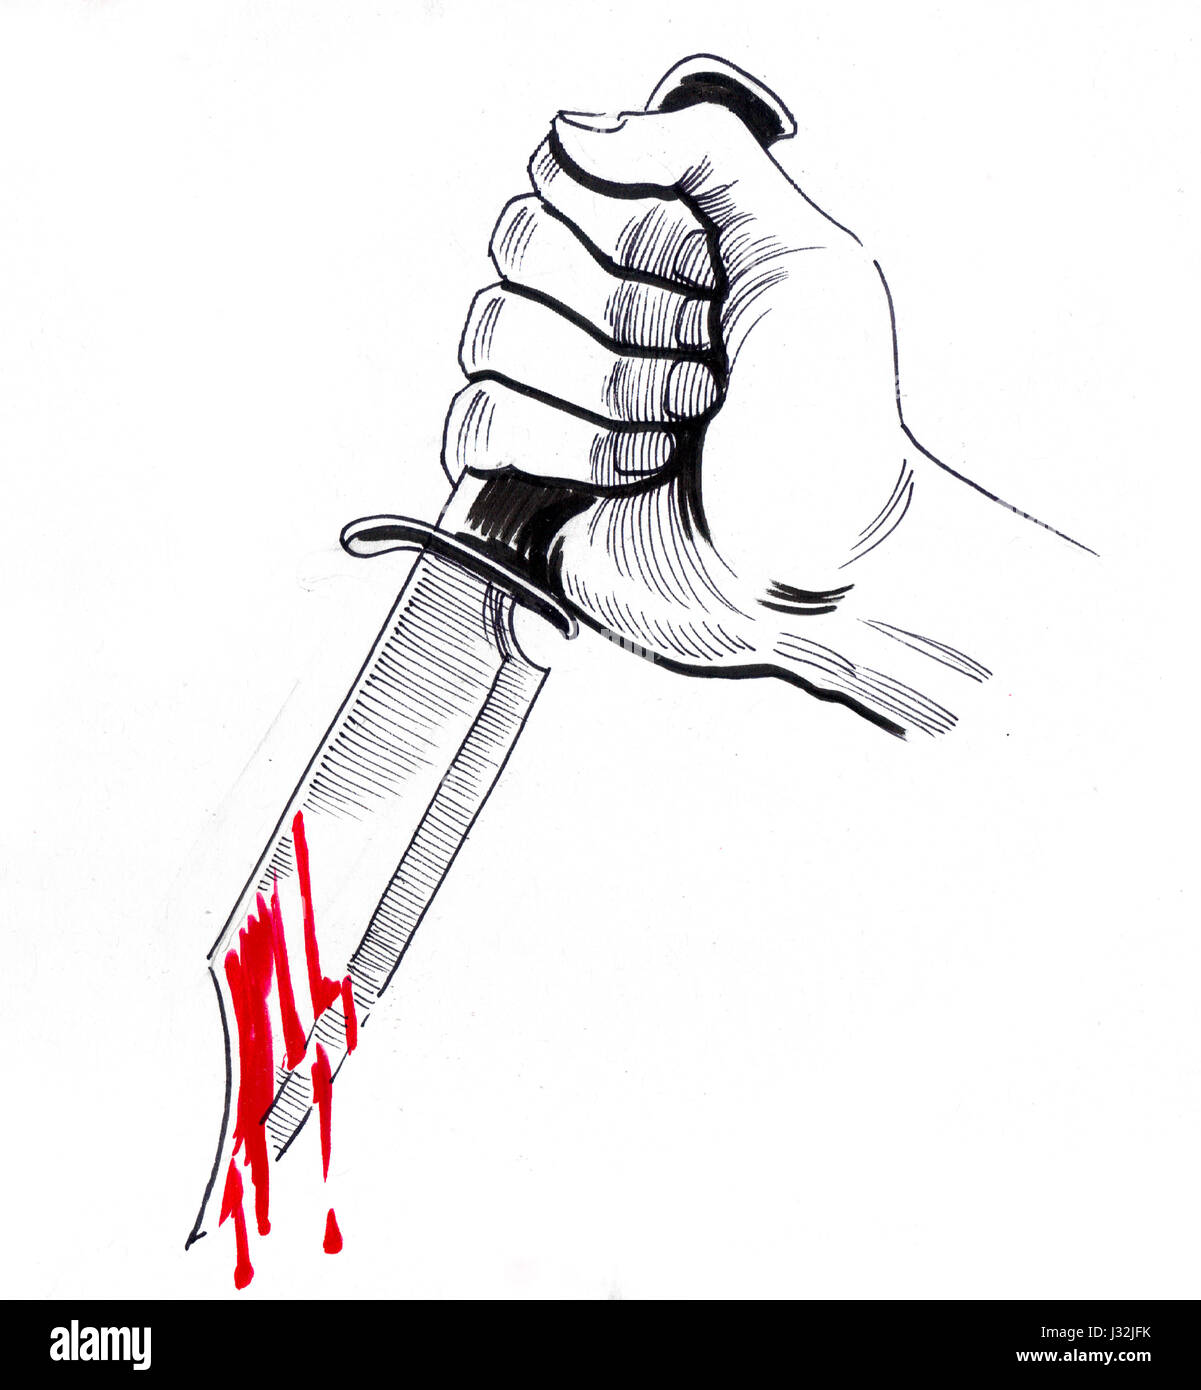 Drawing Knife Blood Stock Photos & Drawing Knife Blood Stock Images - Alamy